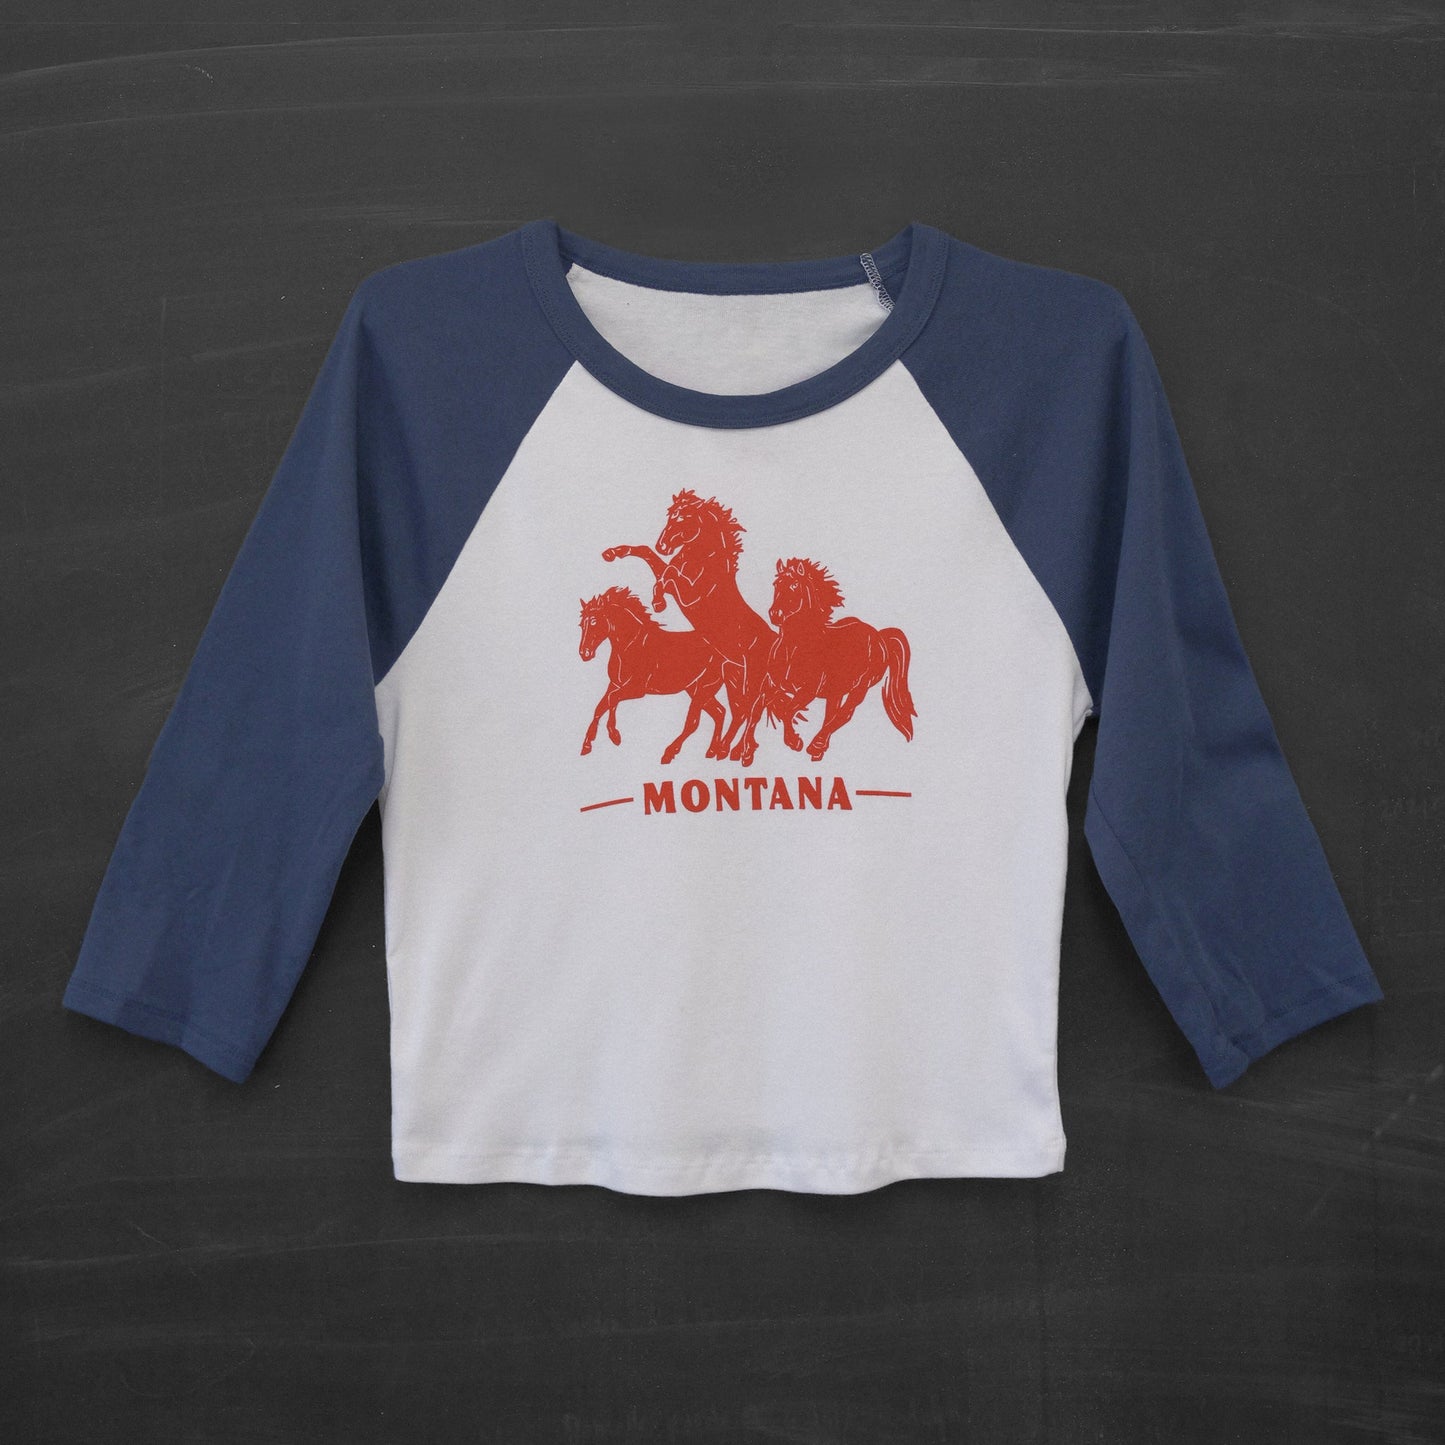 Horsepower Montana Navy Baseball Crop Tee - Intrigue Ink Visit Bozeman, Unique Shopping Boutique in Montana, Work from Home Clothes for Women